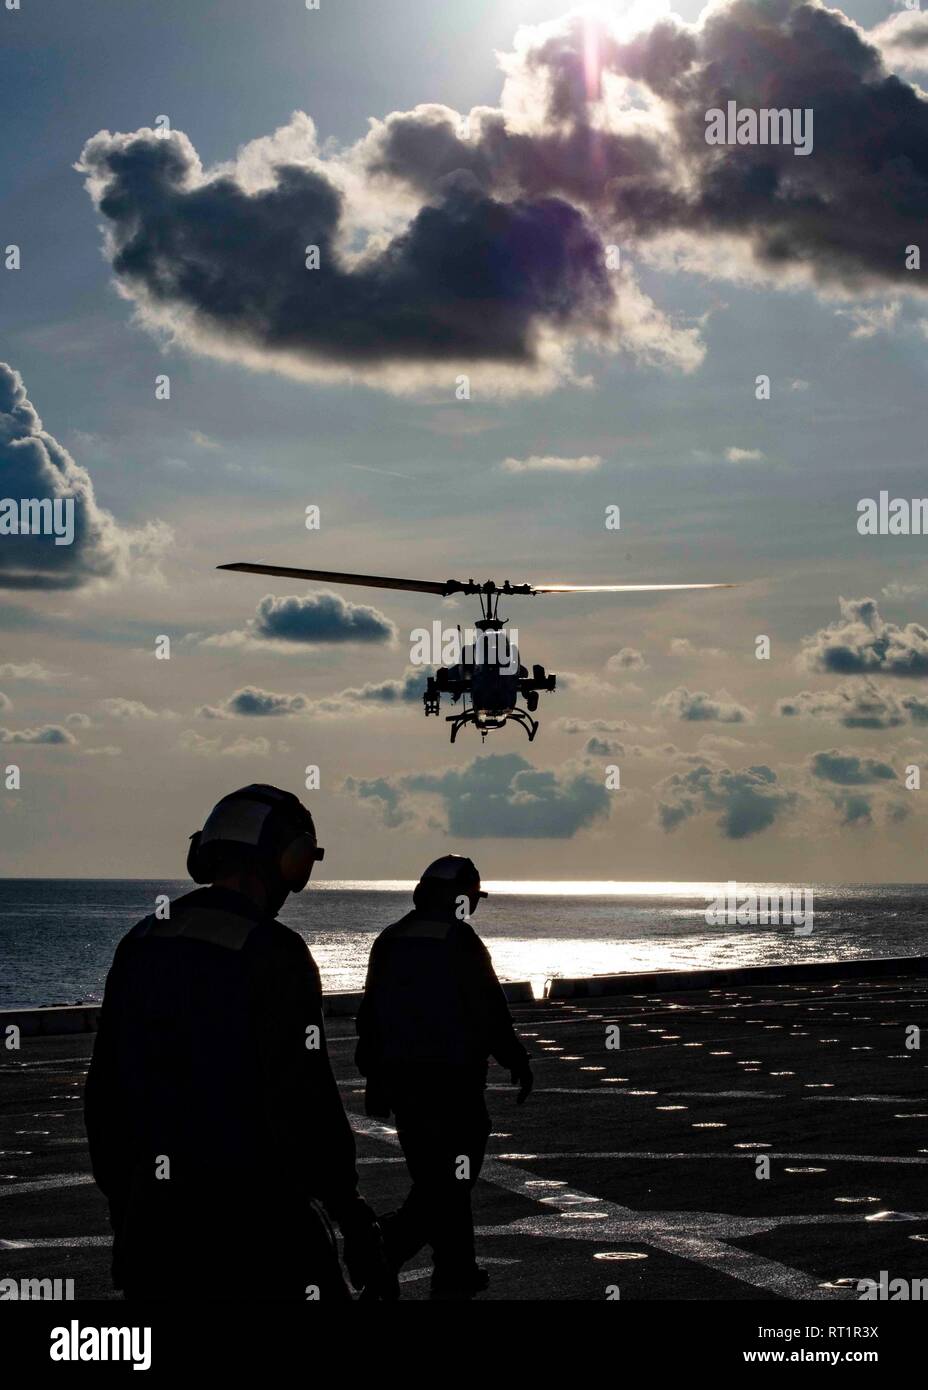 190221-N-HG389-0025 MEDITERRANEAN SEA (Feb. 21, 2019) An AH-1W Super Cobra helicopter assigned to the “Black Knights” of Marine Medium Tiltrotor Squadron (VMM) 264 (Reinforced) prepares to land on the flight deck of the San Antonio-class amphibious transport dock ship USS Arlington (LPD 24), Feb. 21, 2019. Arlington is on a scheduled deployment as part of the Kearsarge Amphibious Ready Group in support of maritime security operations, crisis response and theater security cooperation, while also providing a forward naval presence. (U.S. Navy photo by Mass Communication Specialist 2nd Class Bran Stock Photo